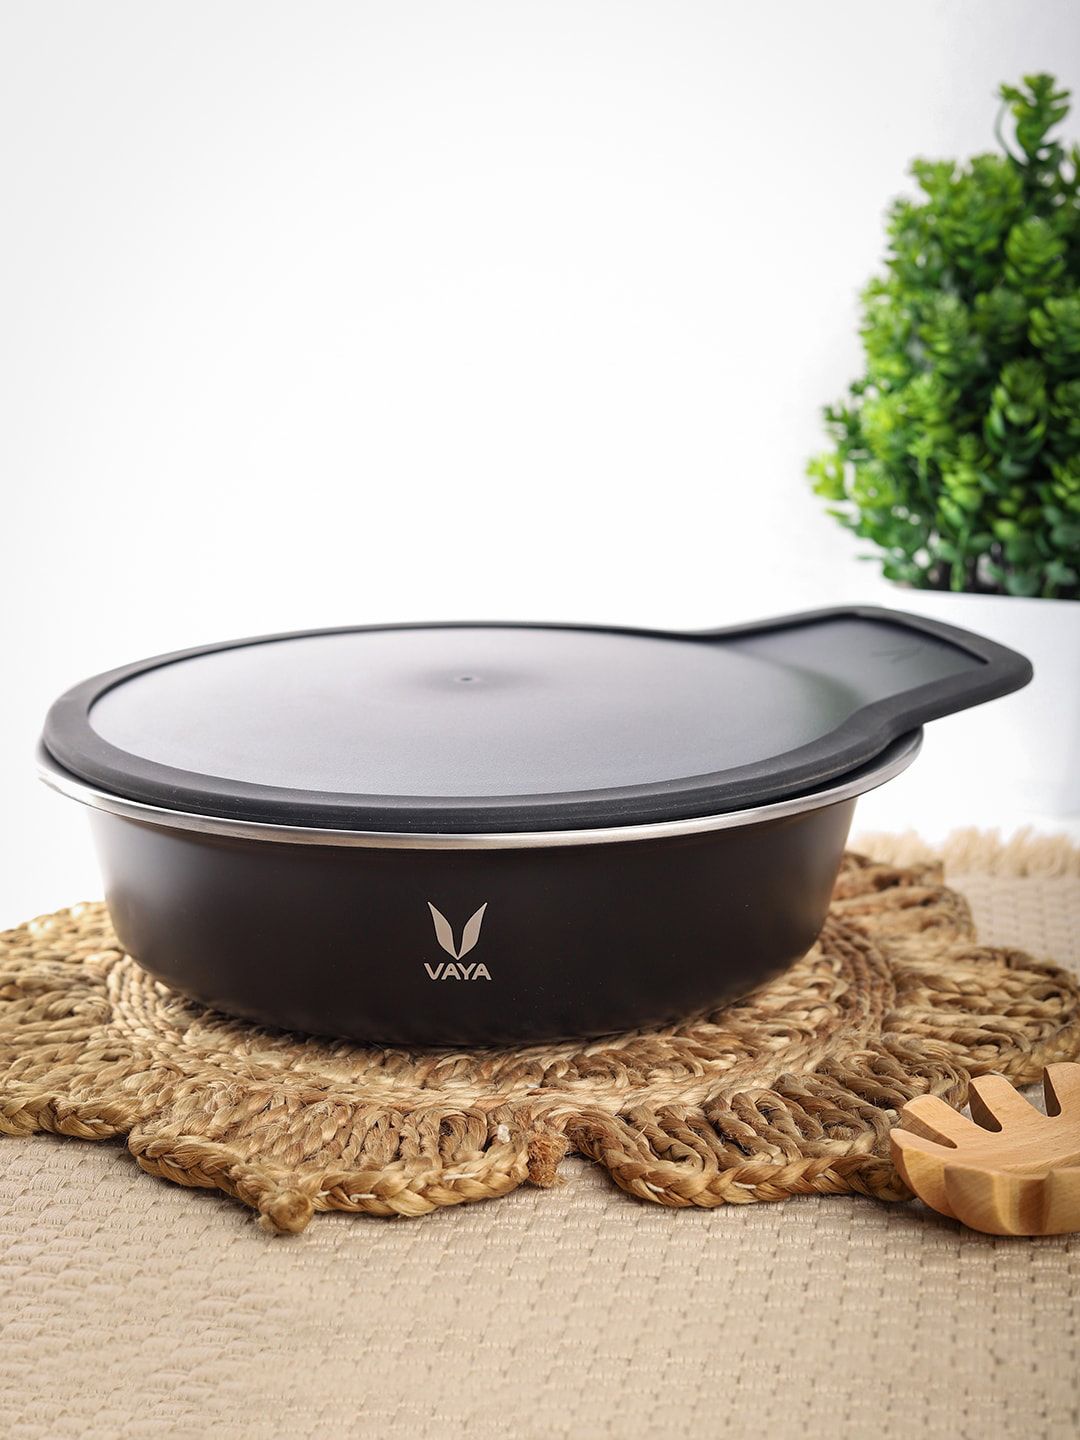 Vaya Black Solid Vacuum-Insulated Stainless Steel 1.1 L Casserole Price in India